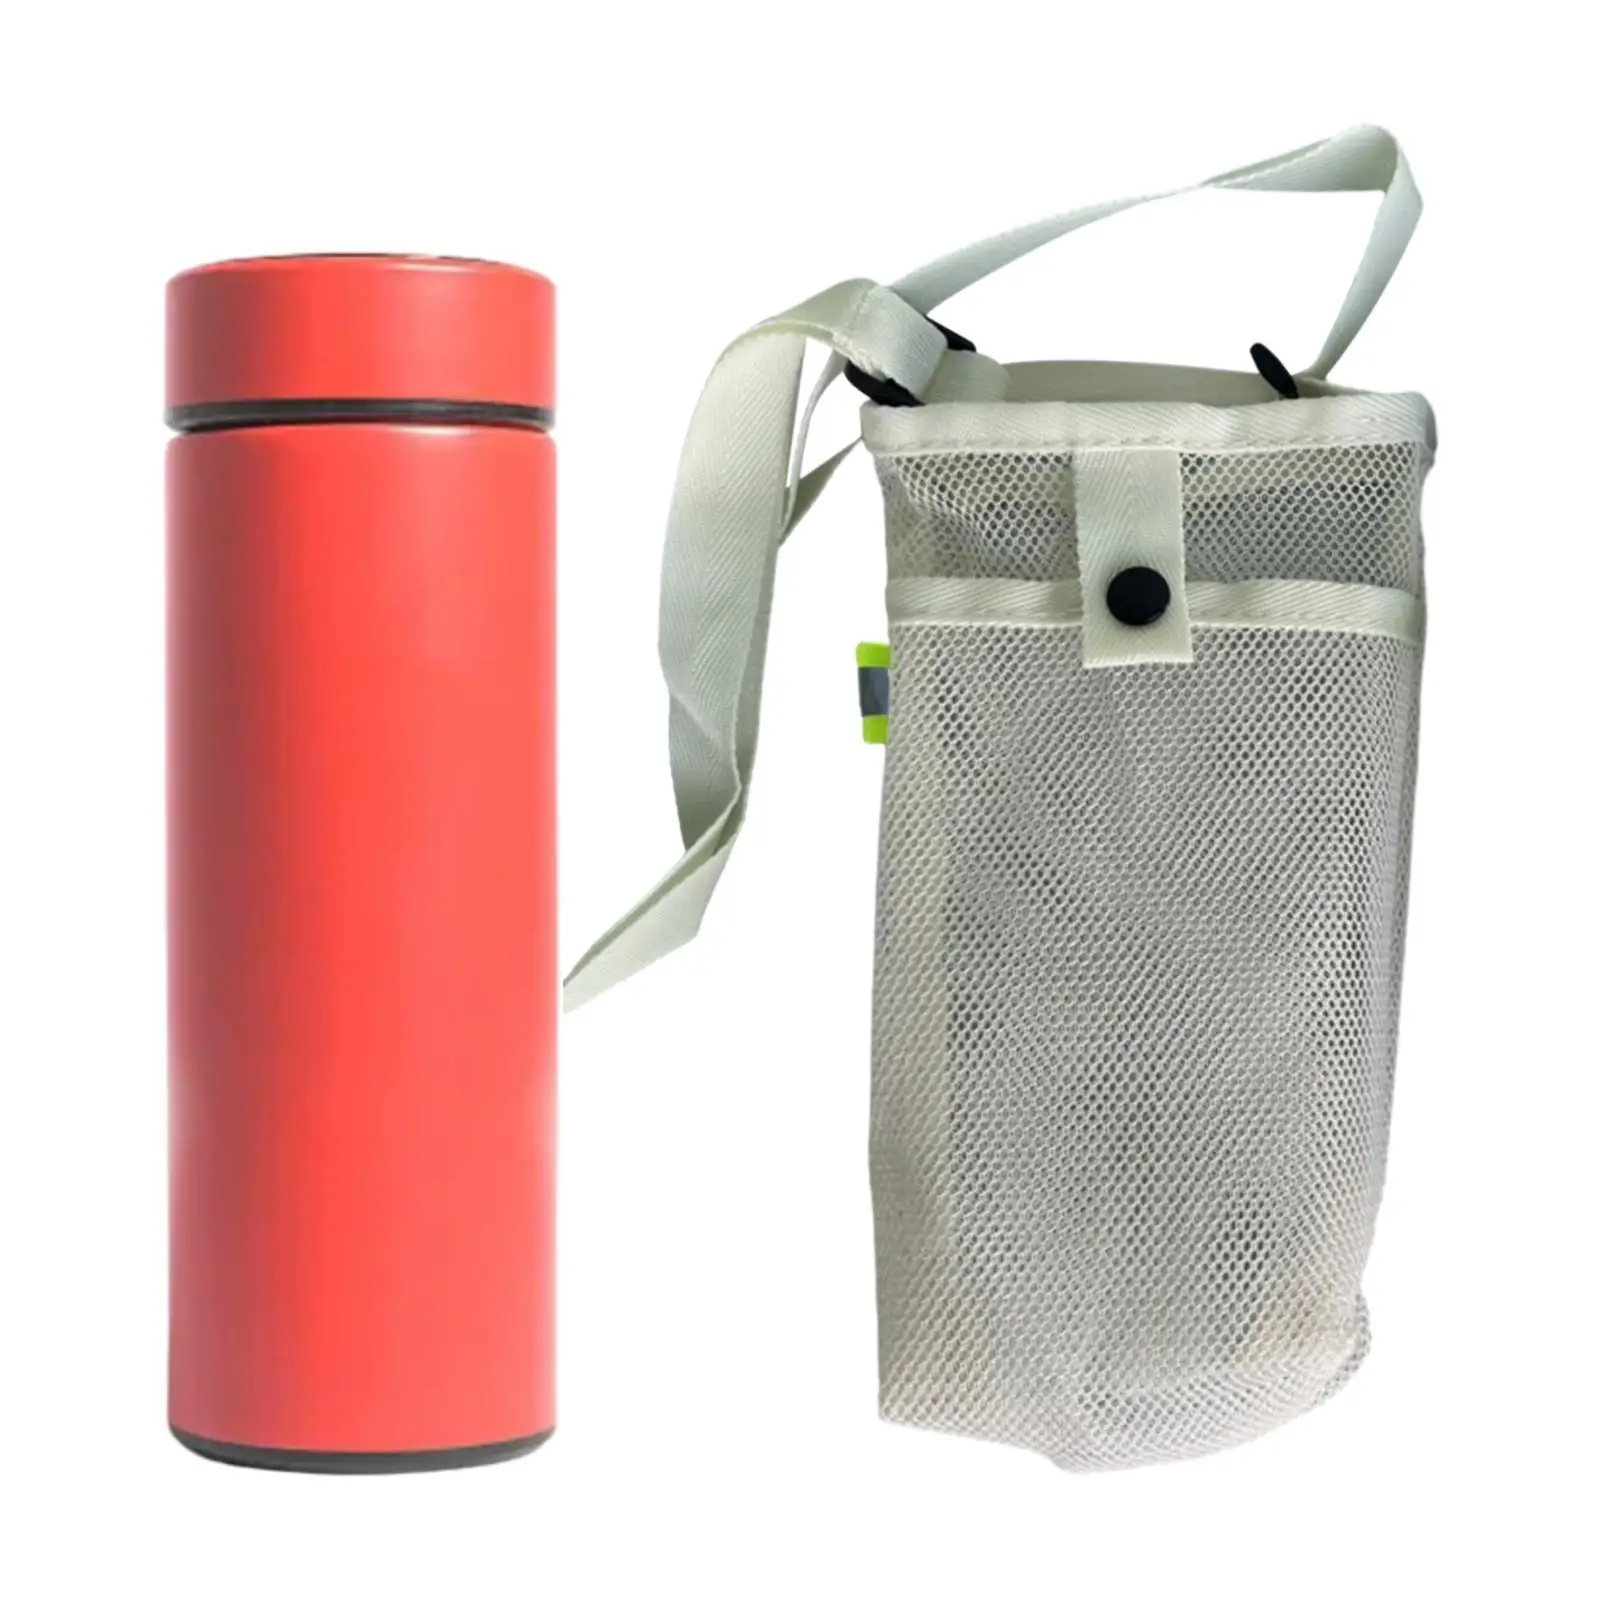 Mesh Water Bottle Holder Foldable Water Bottle Cover Water Bottle Pouch for Travel Backpacking Outdoor Activities Hiking Cycling